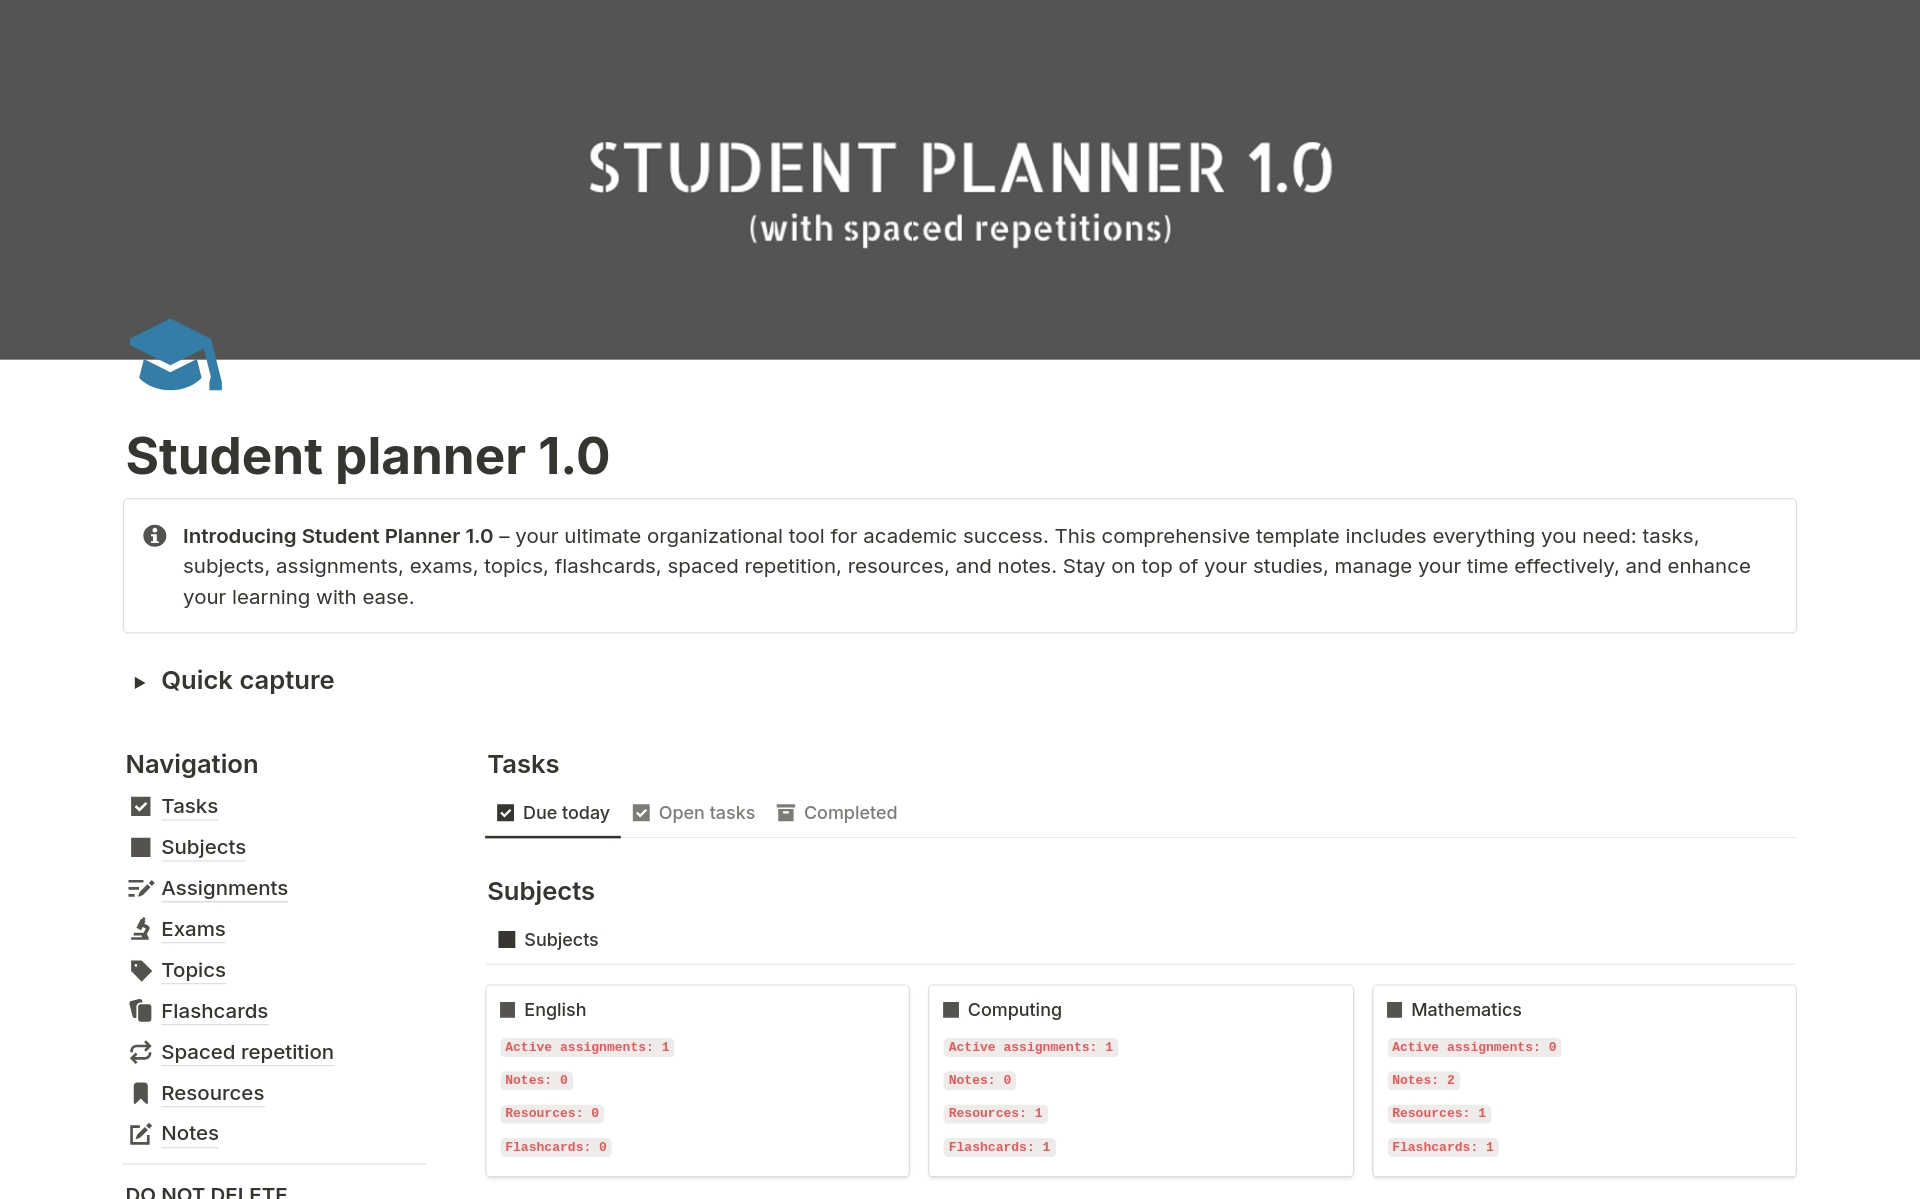 Introducing Student Planner 1.0 – your ultimate organizational tool for academic success. This comprehensive template includes everything you need: tasks, subjects, assignments, exams, topics, flashcards, spaced repetition, resources, and notes. 